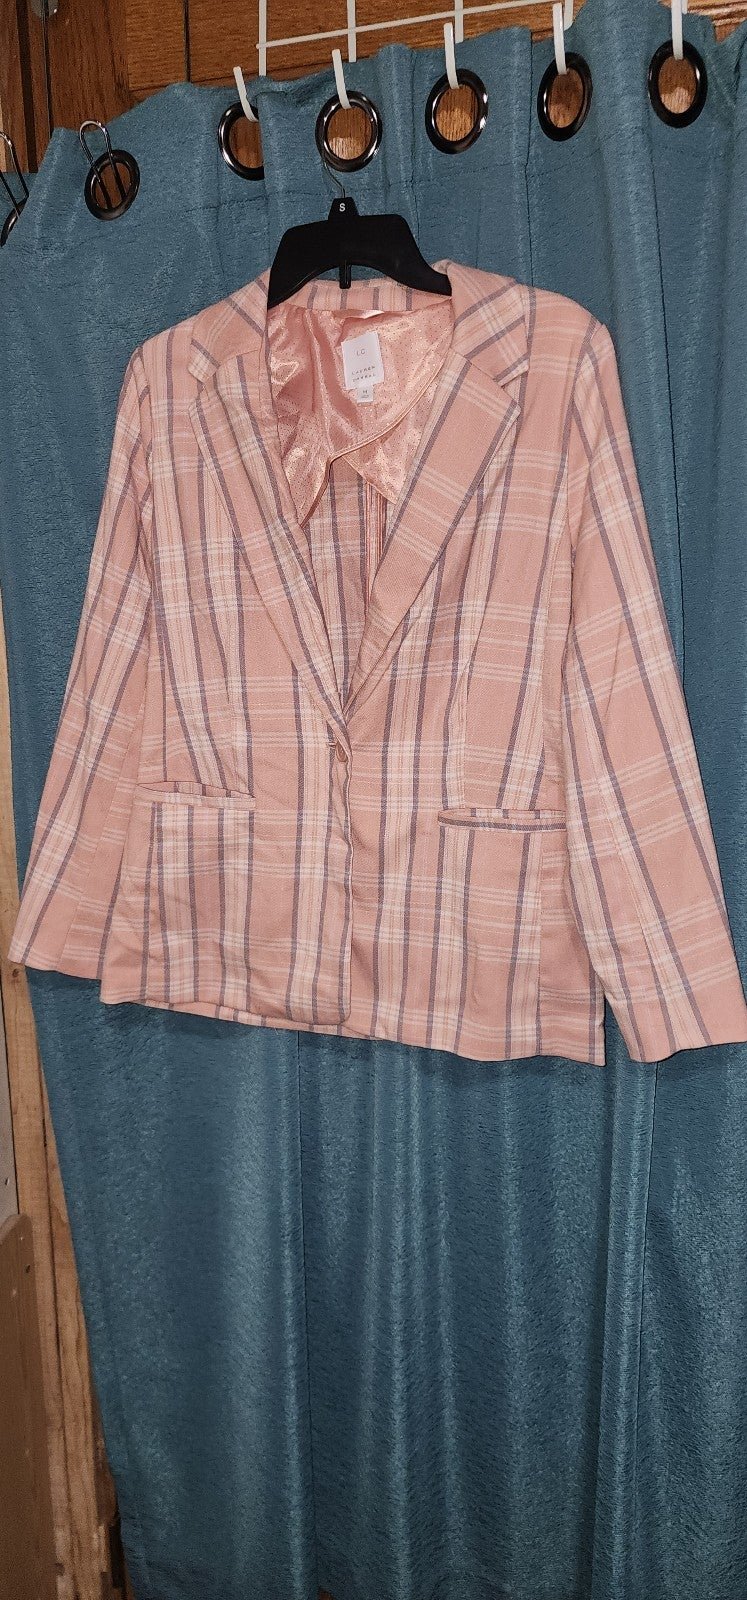 cheapest place to buy  LC Lauren Conrad Relaxed Pink Blazer  Plaid Stripe Long Sleeve Button Pockets fzB2kyBIQ Outlet Store